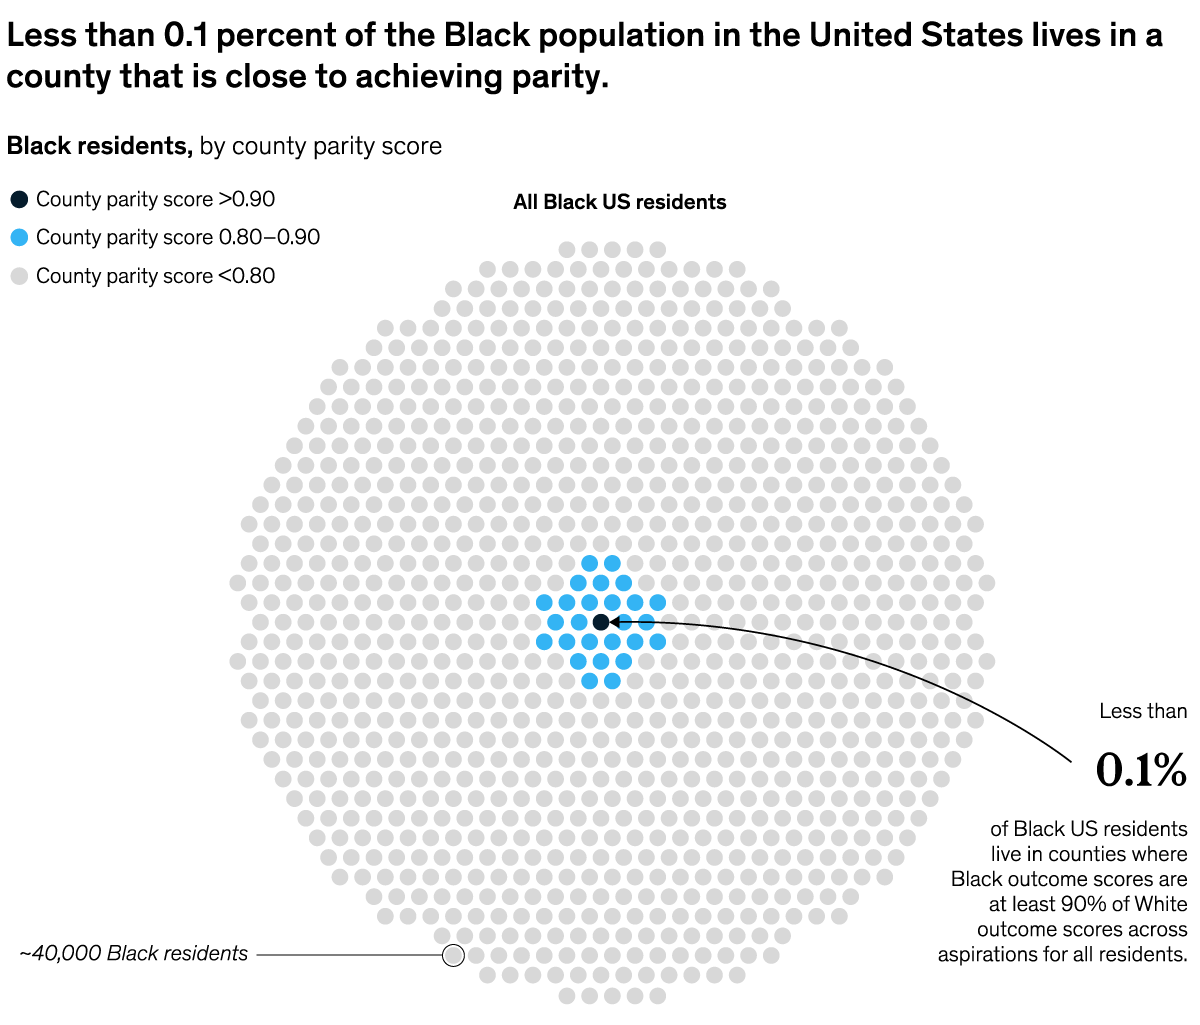 A chart titled “Less than 0.1 percent of the Black population in the United States lives in a county that is close to achieving parity.” Click to open the full article on McKinsey.com.